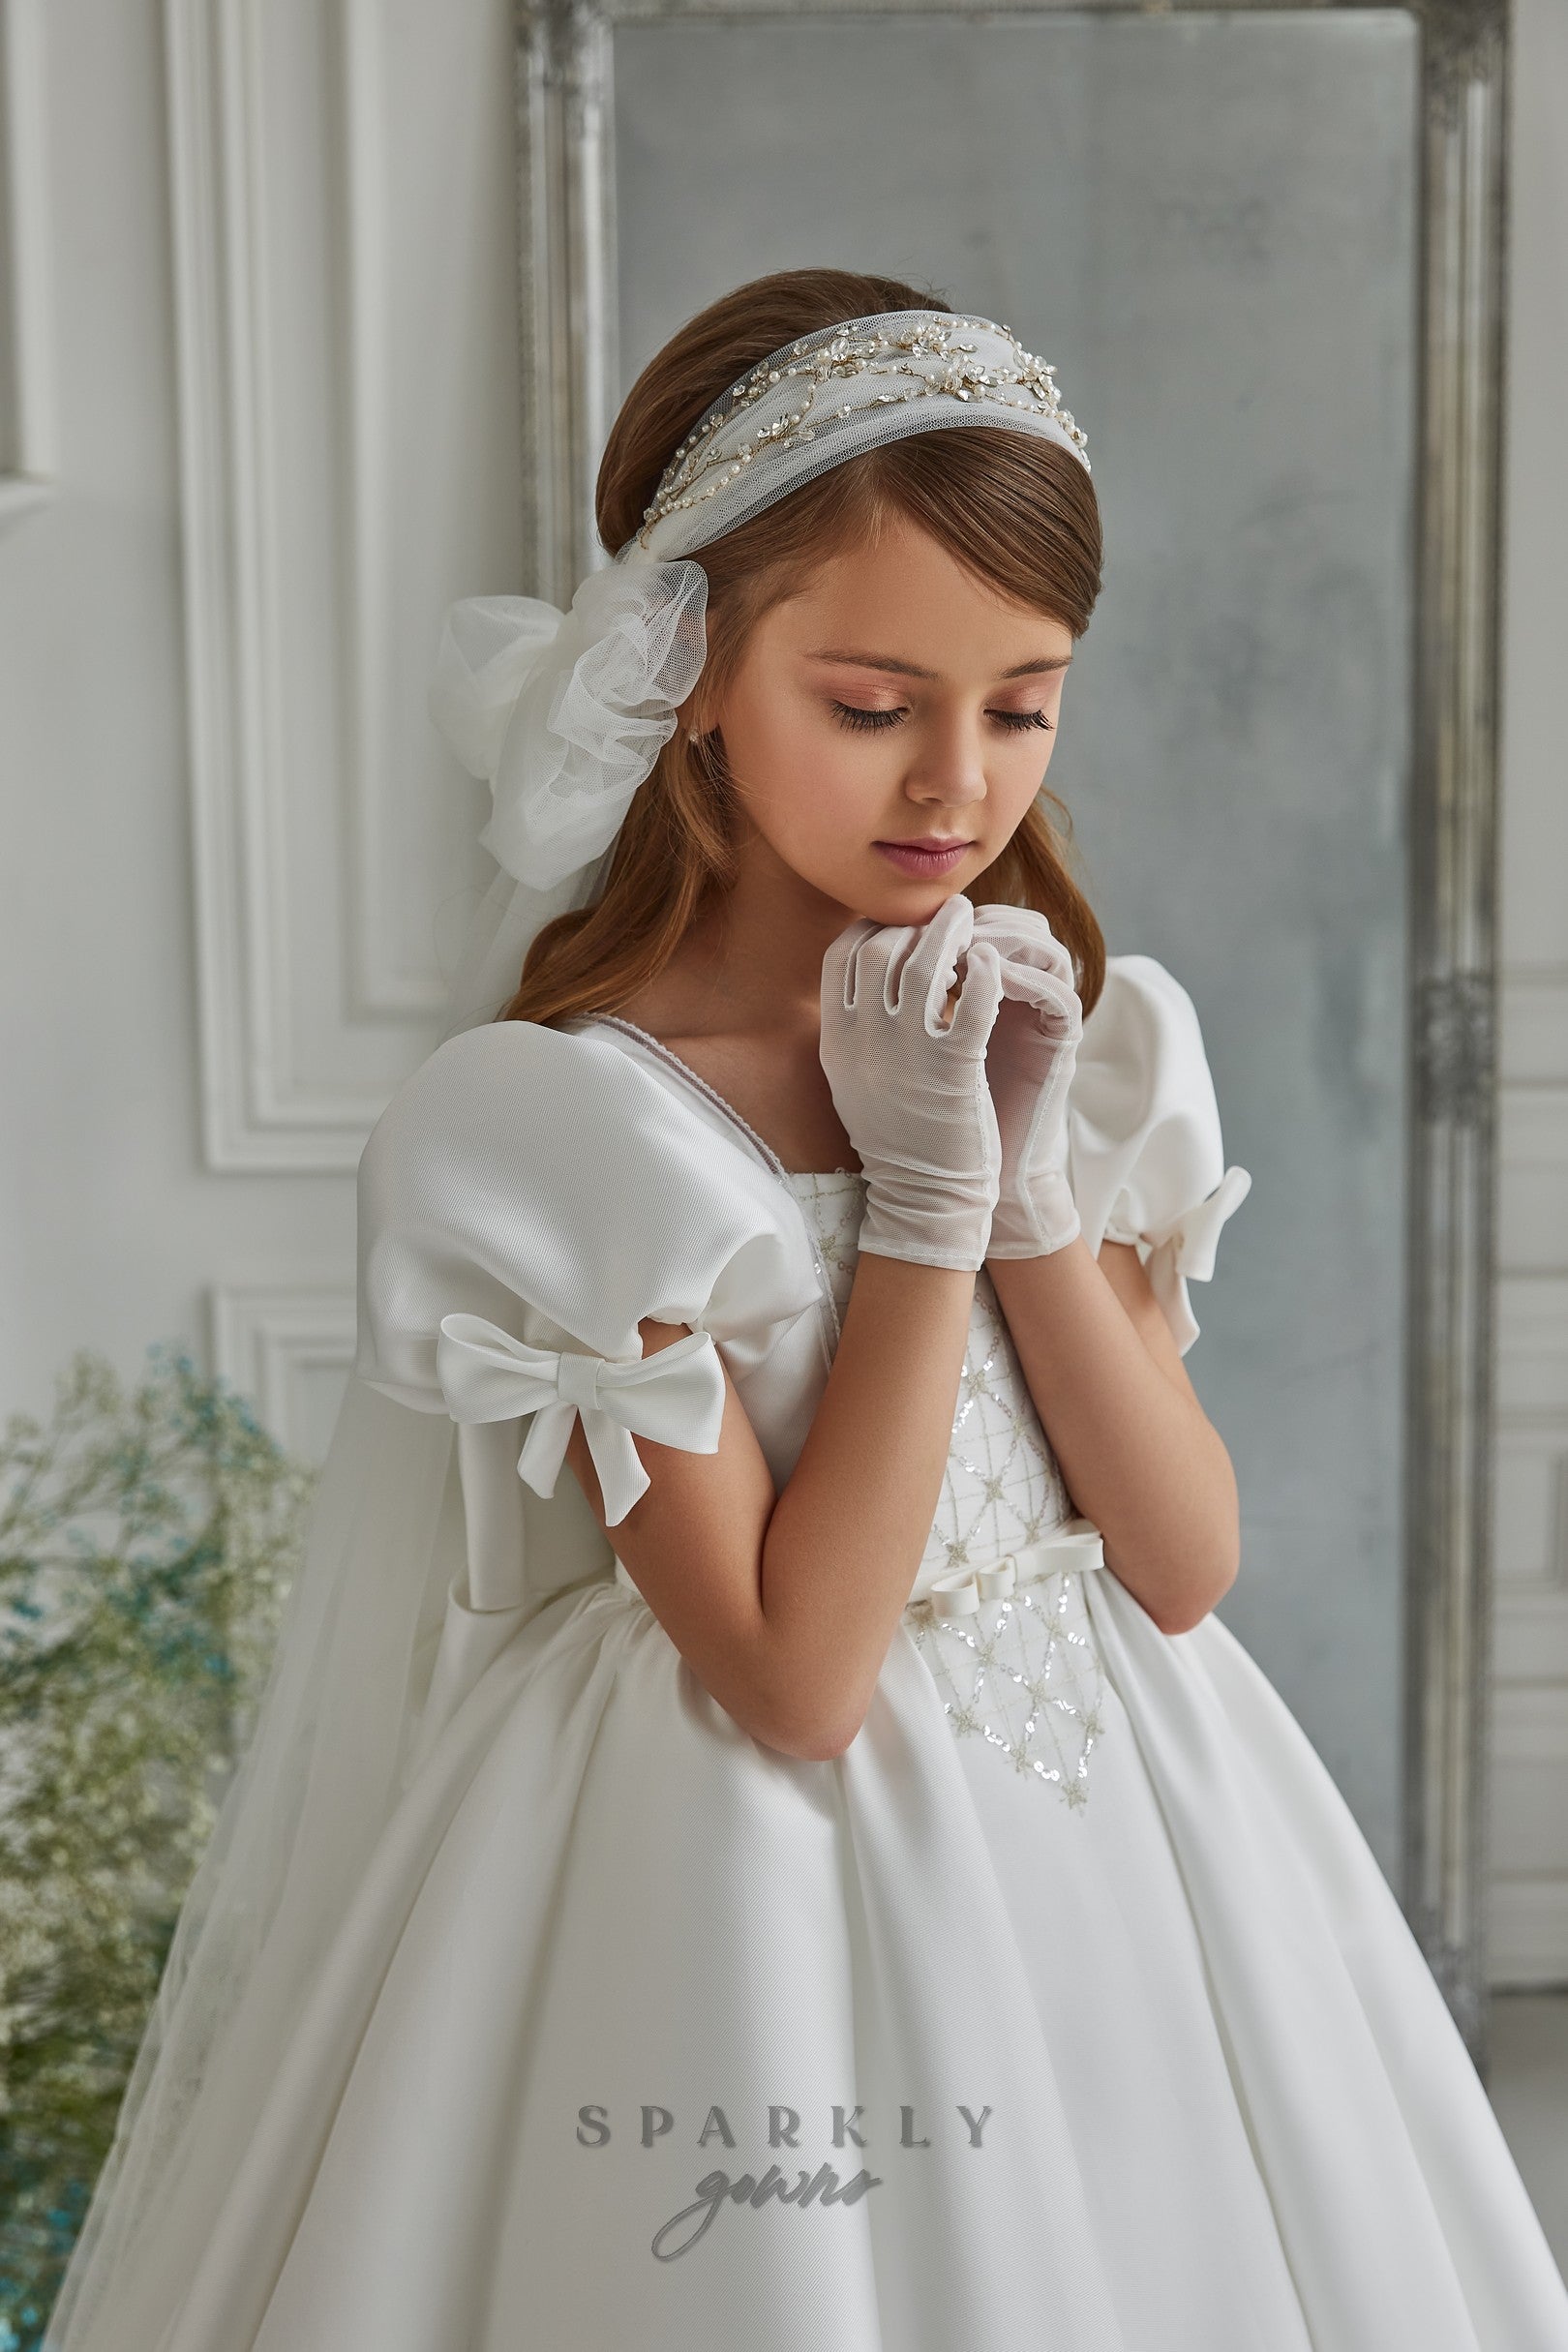 Puffed Long Sleeves Sparkle Tulle Floral Appliques Flower Girl